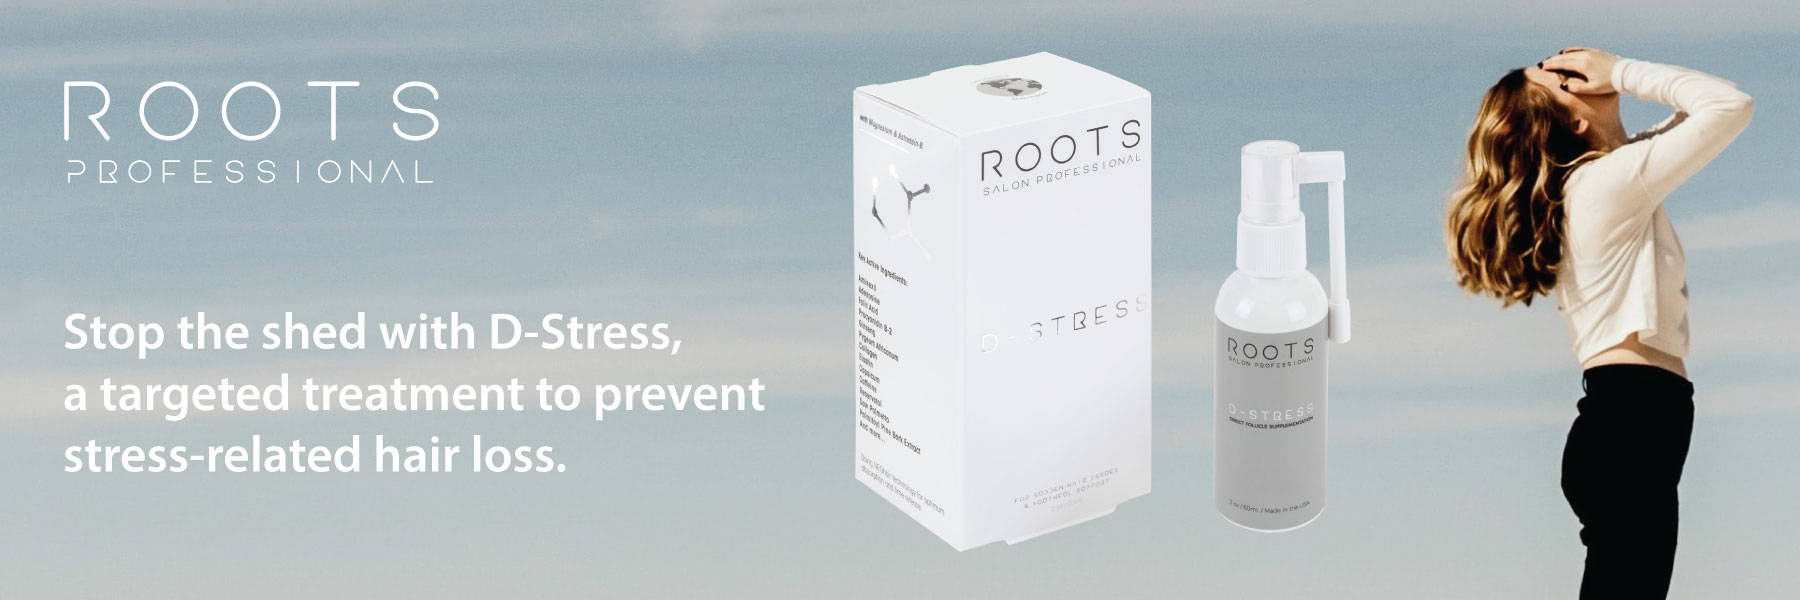 Roots Professional